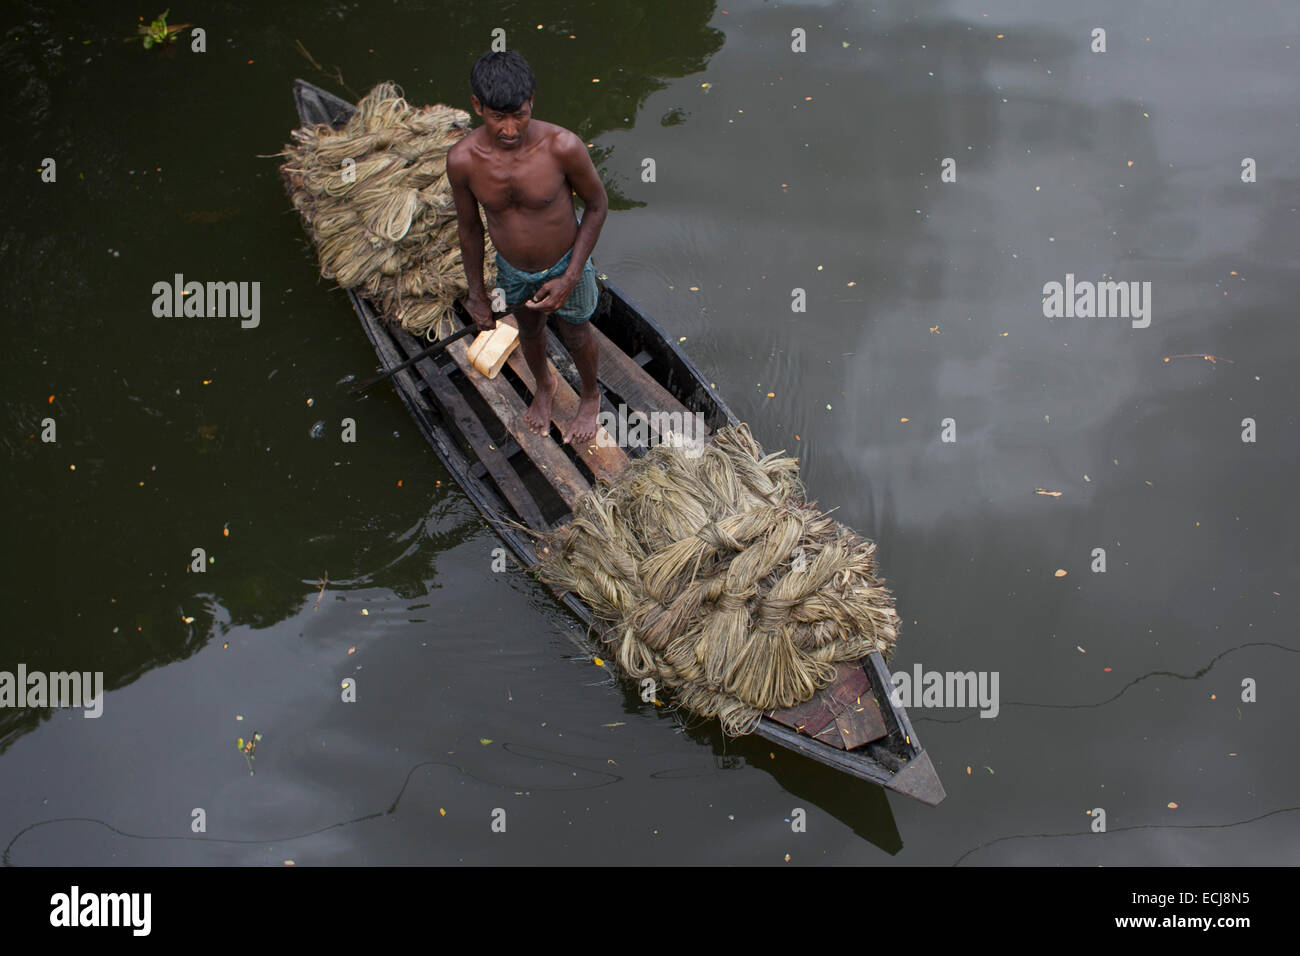 Farmer carrying jute using boat. Jute in Bangladesh is called 'The Golden Fiber'is used for exporting jute products.Bangladesh is the world's largest producer of jute, a fibrous substance used in making burlap, sacks, mats, rope and twine, and carpet backing. Stock Photo